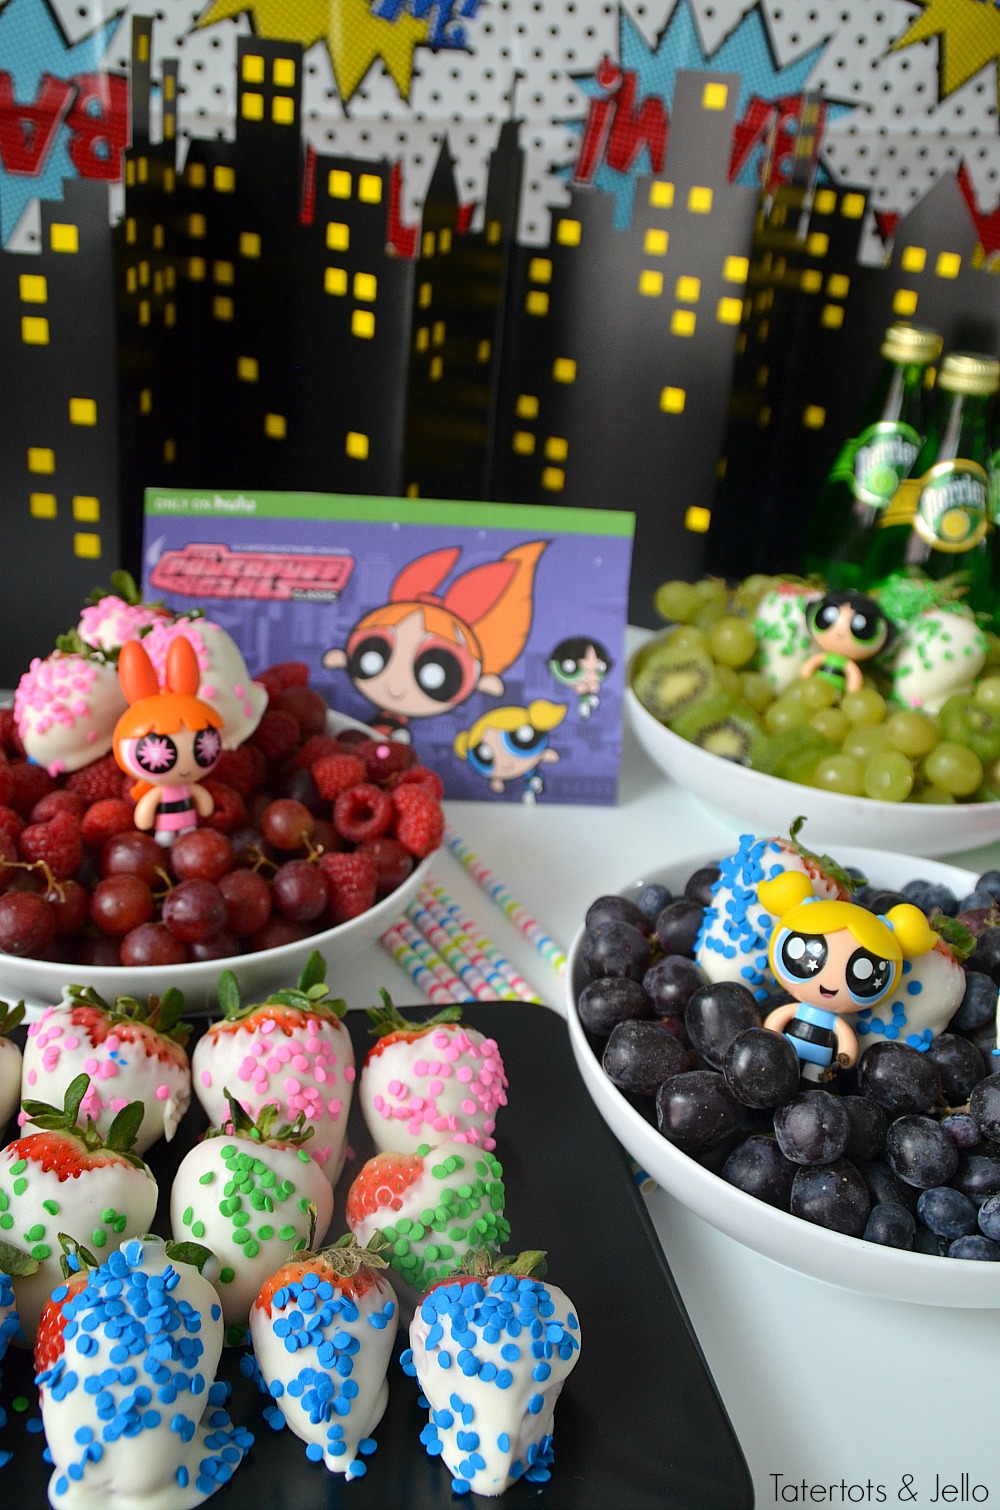 Powerpuff Girls Party Ideas. Make healthy fruit trays in each of the character's colors - pink, blue and green! 